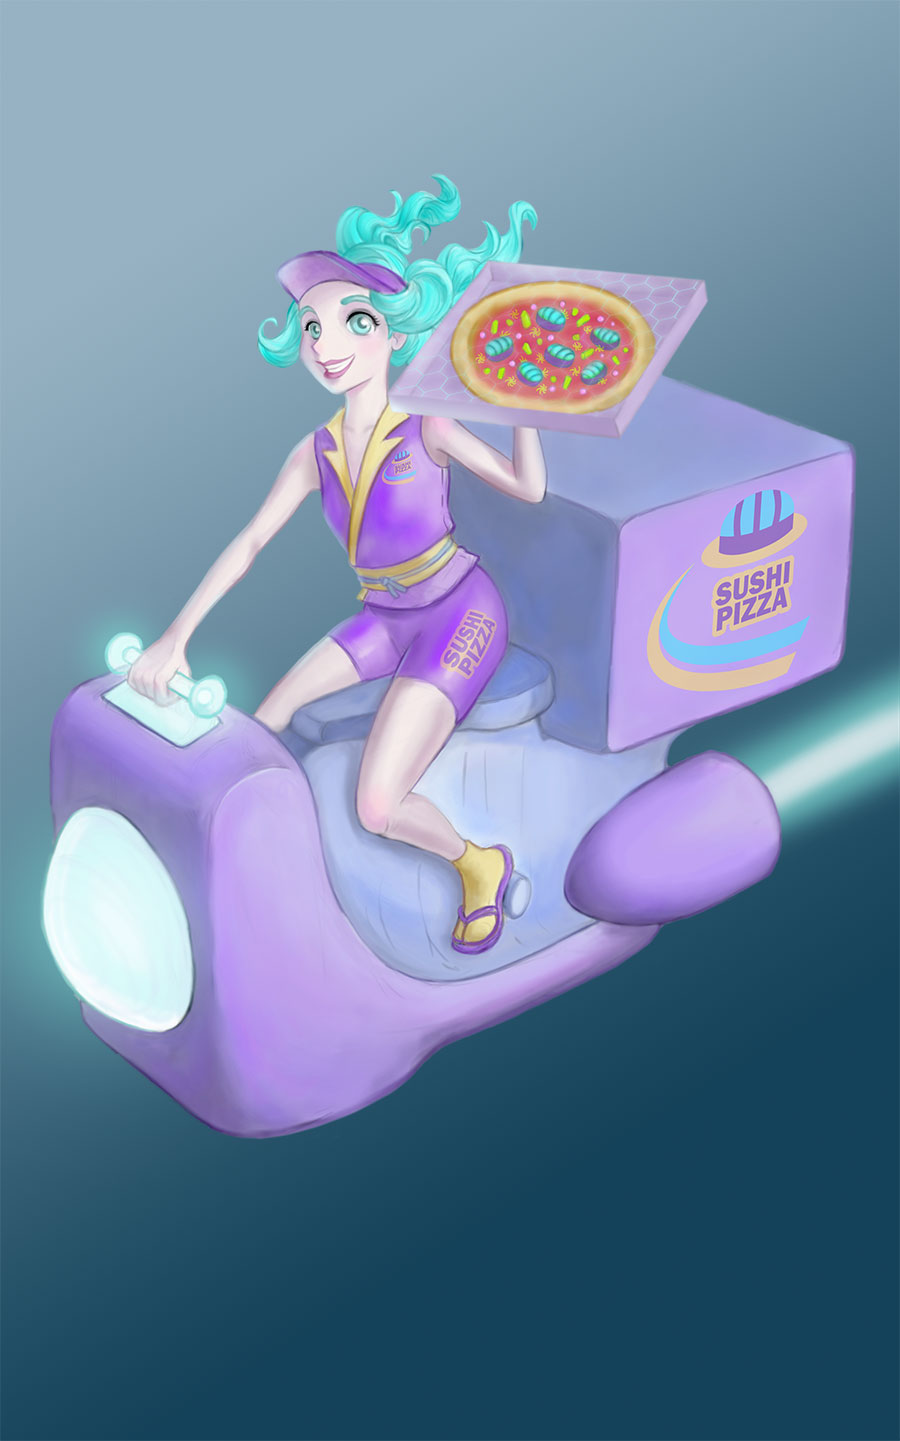 Space Pizza Delivery Girl